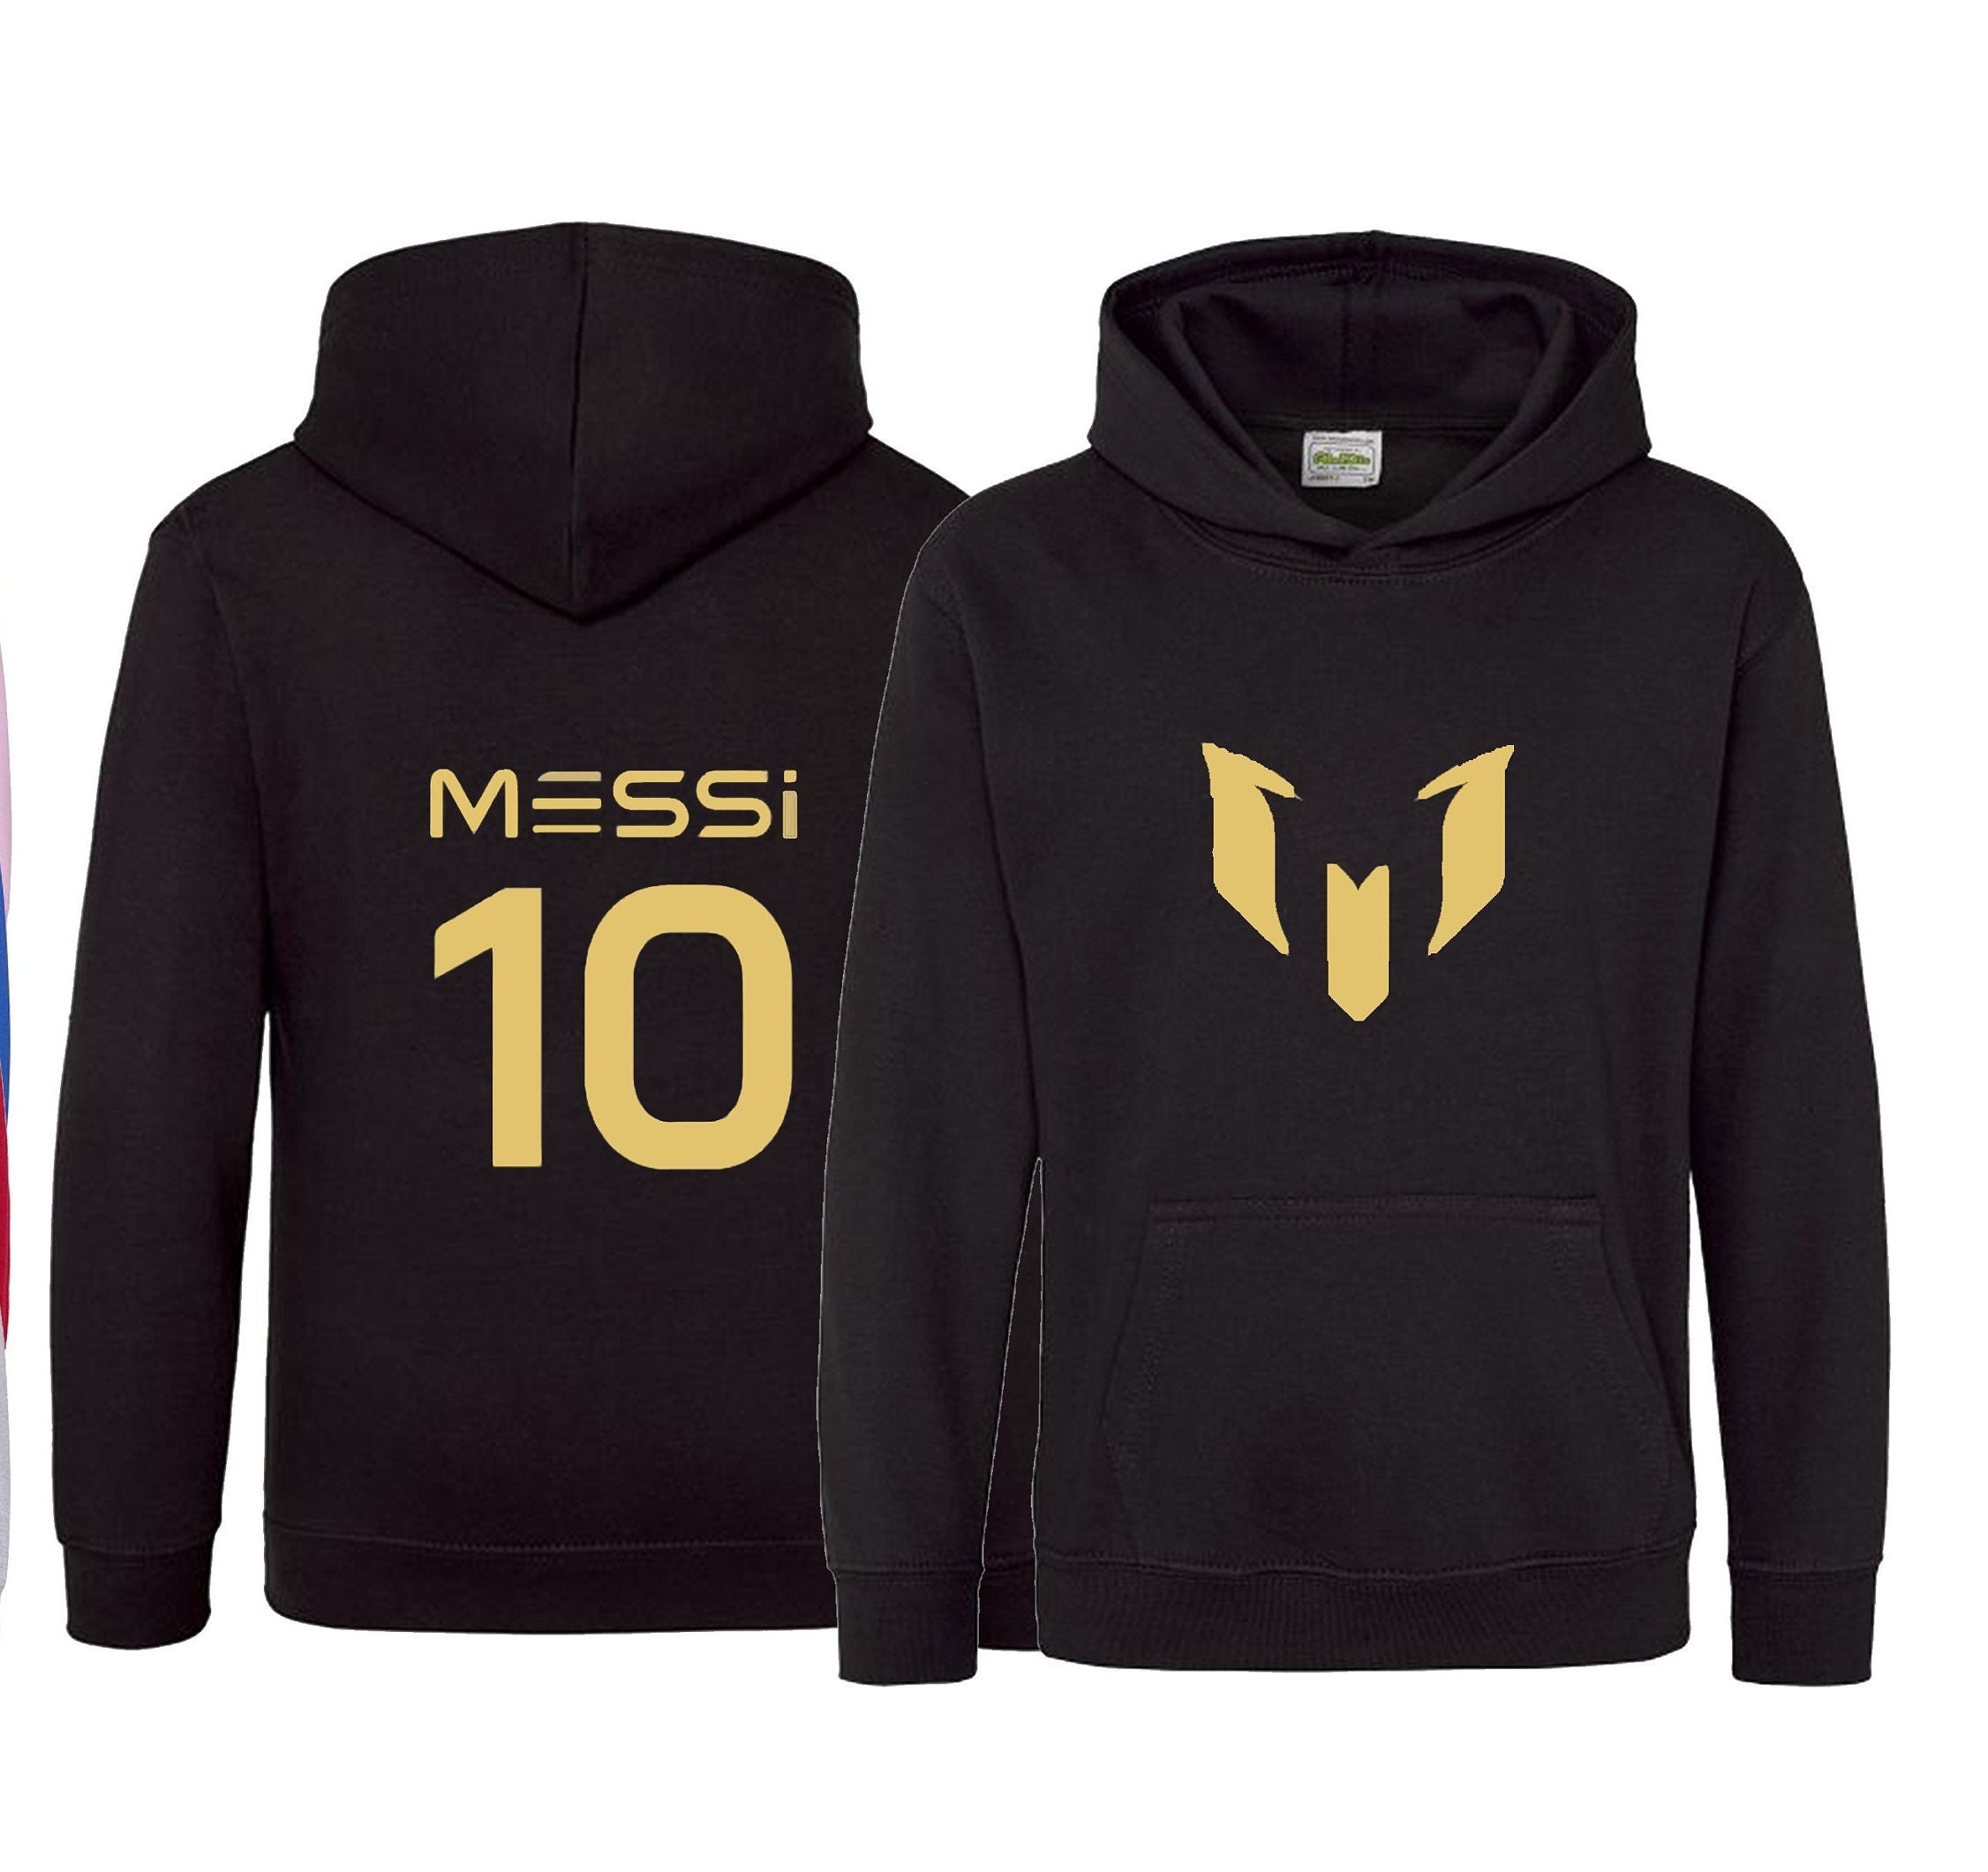 Official lionel Messi Do a Kickflip Shirt, hoodie, sweater, long sleeve and  tank top